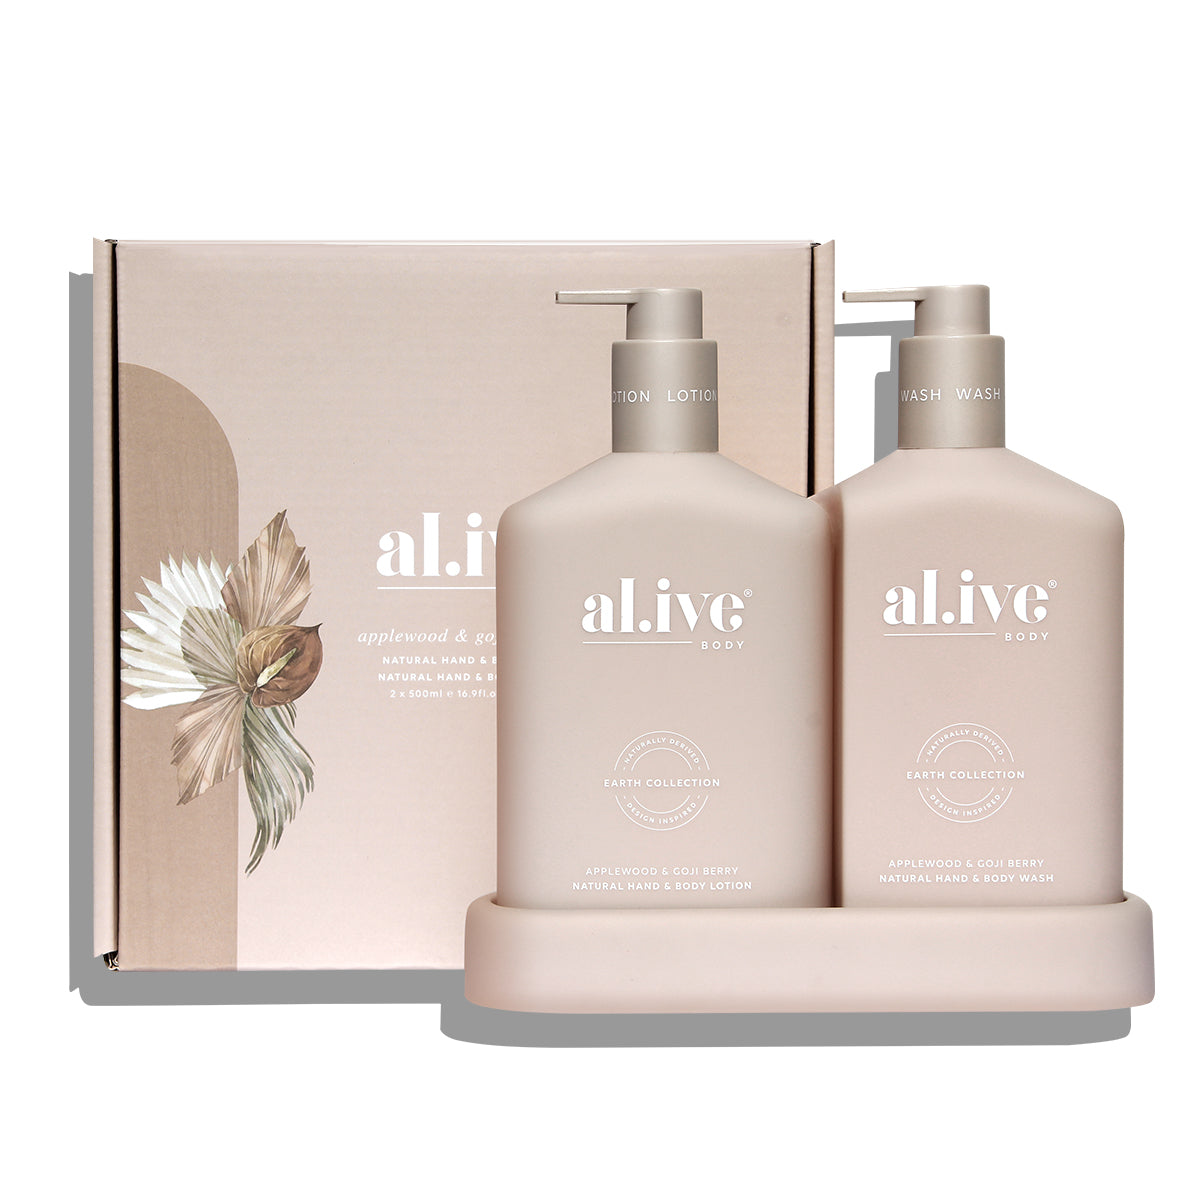 The al.ive body Applewood & Goji Berry Hand & Body Wash/Lotion Duo contains a luxurious blend of naturally derived ingredients, fortified with essential oils and native botanical extracts.  The Duo includes a 500ml hand & body wash, 500ml hand & body lotion and a matching tray.